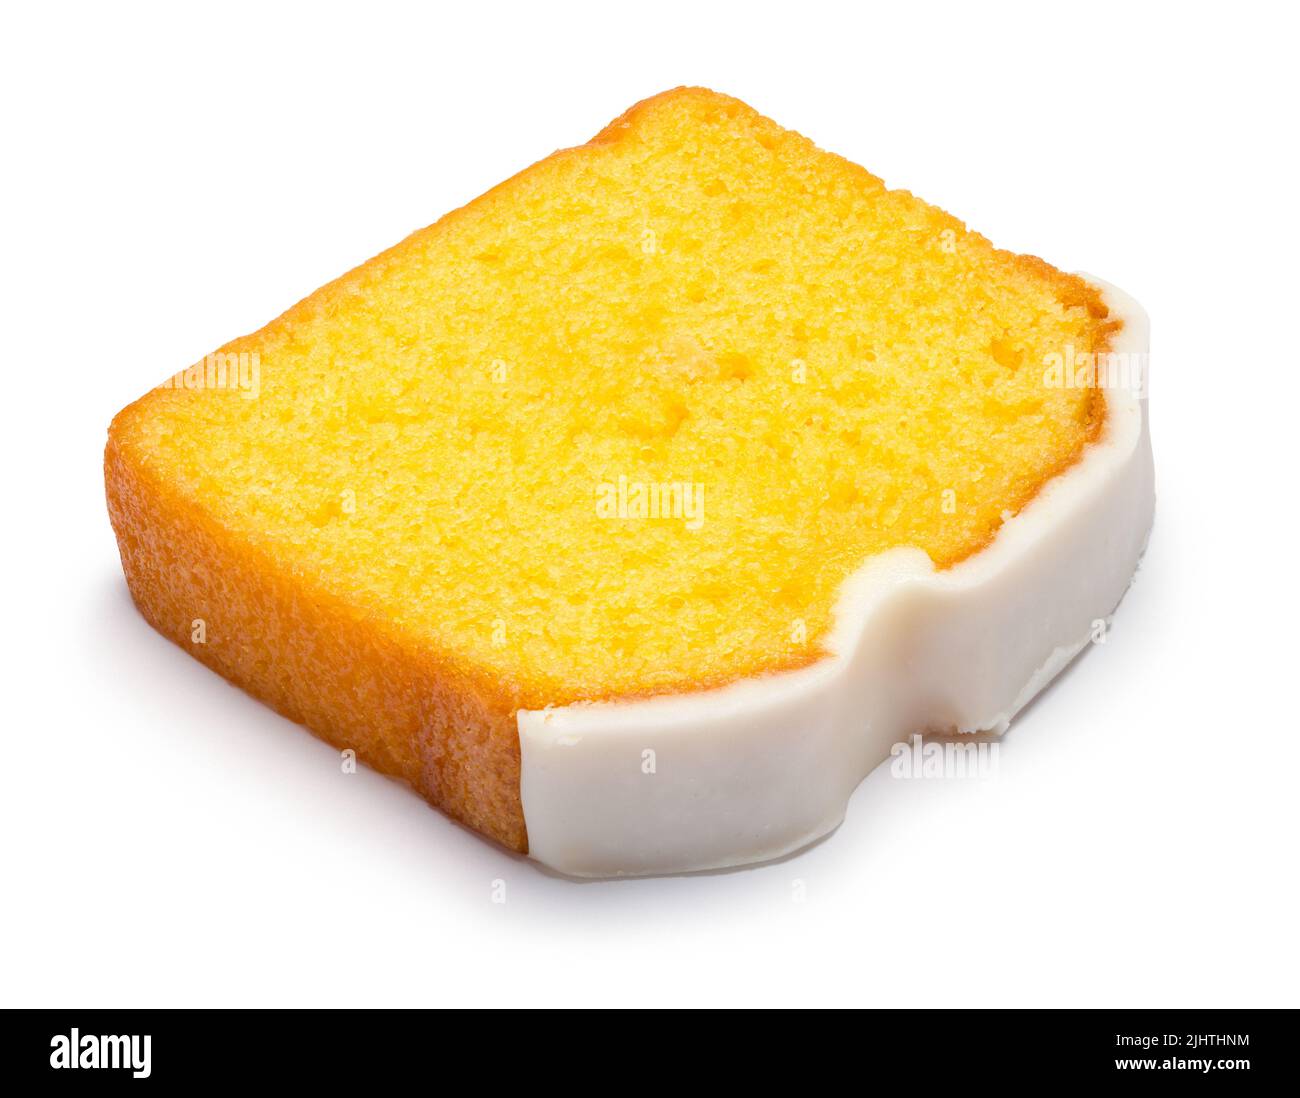 Slice of Frosted Lemon Cake Cut Out on White. Stock Photo